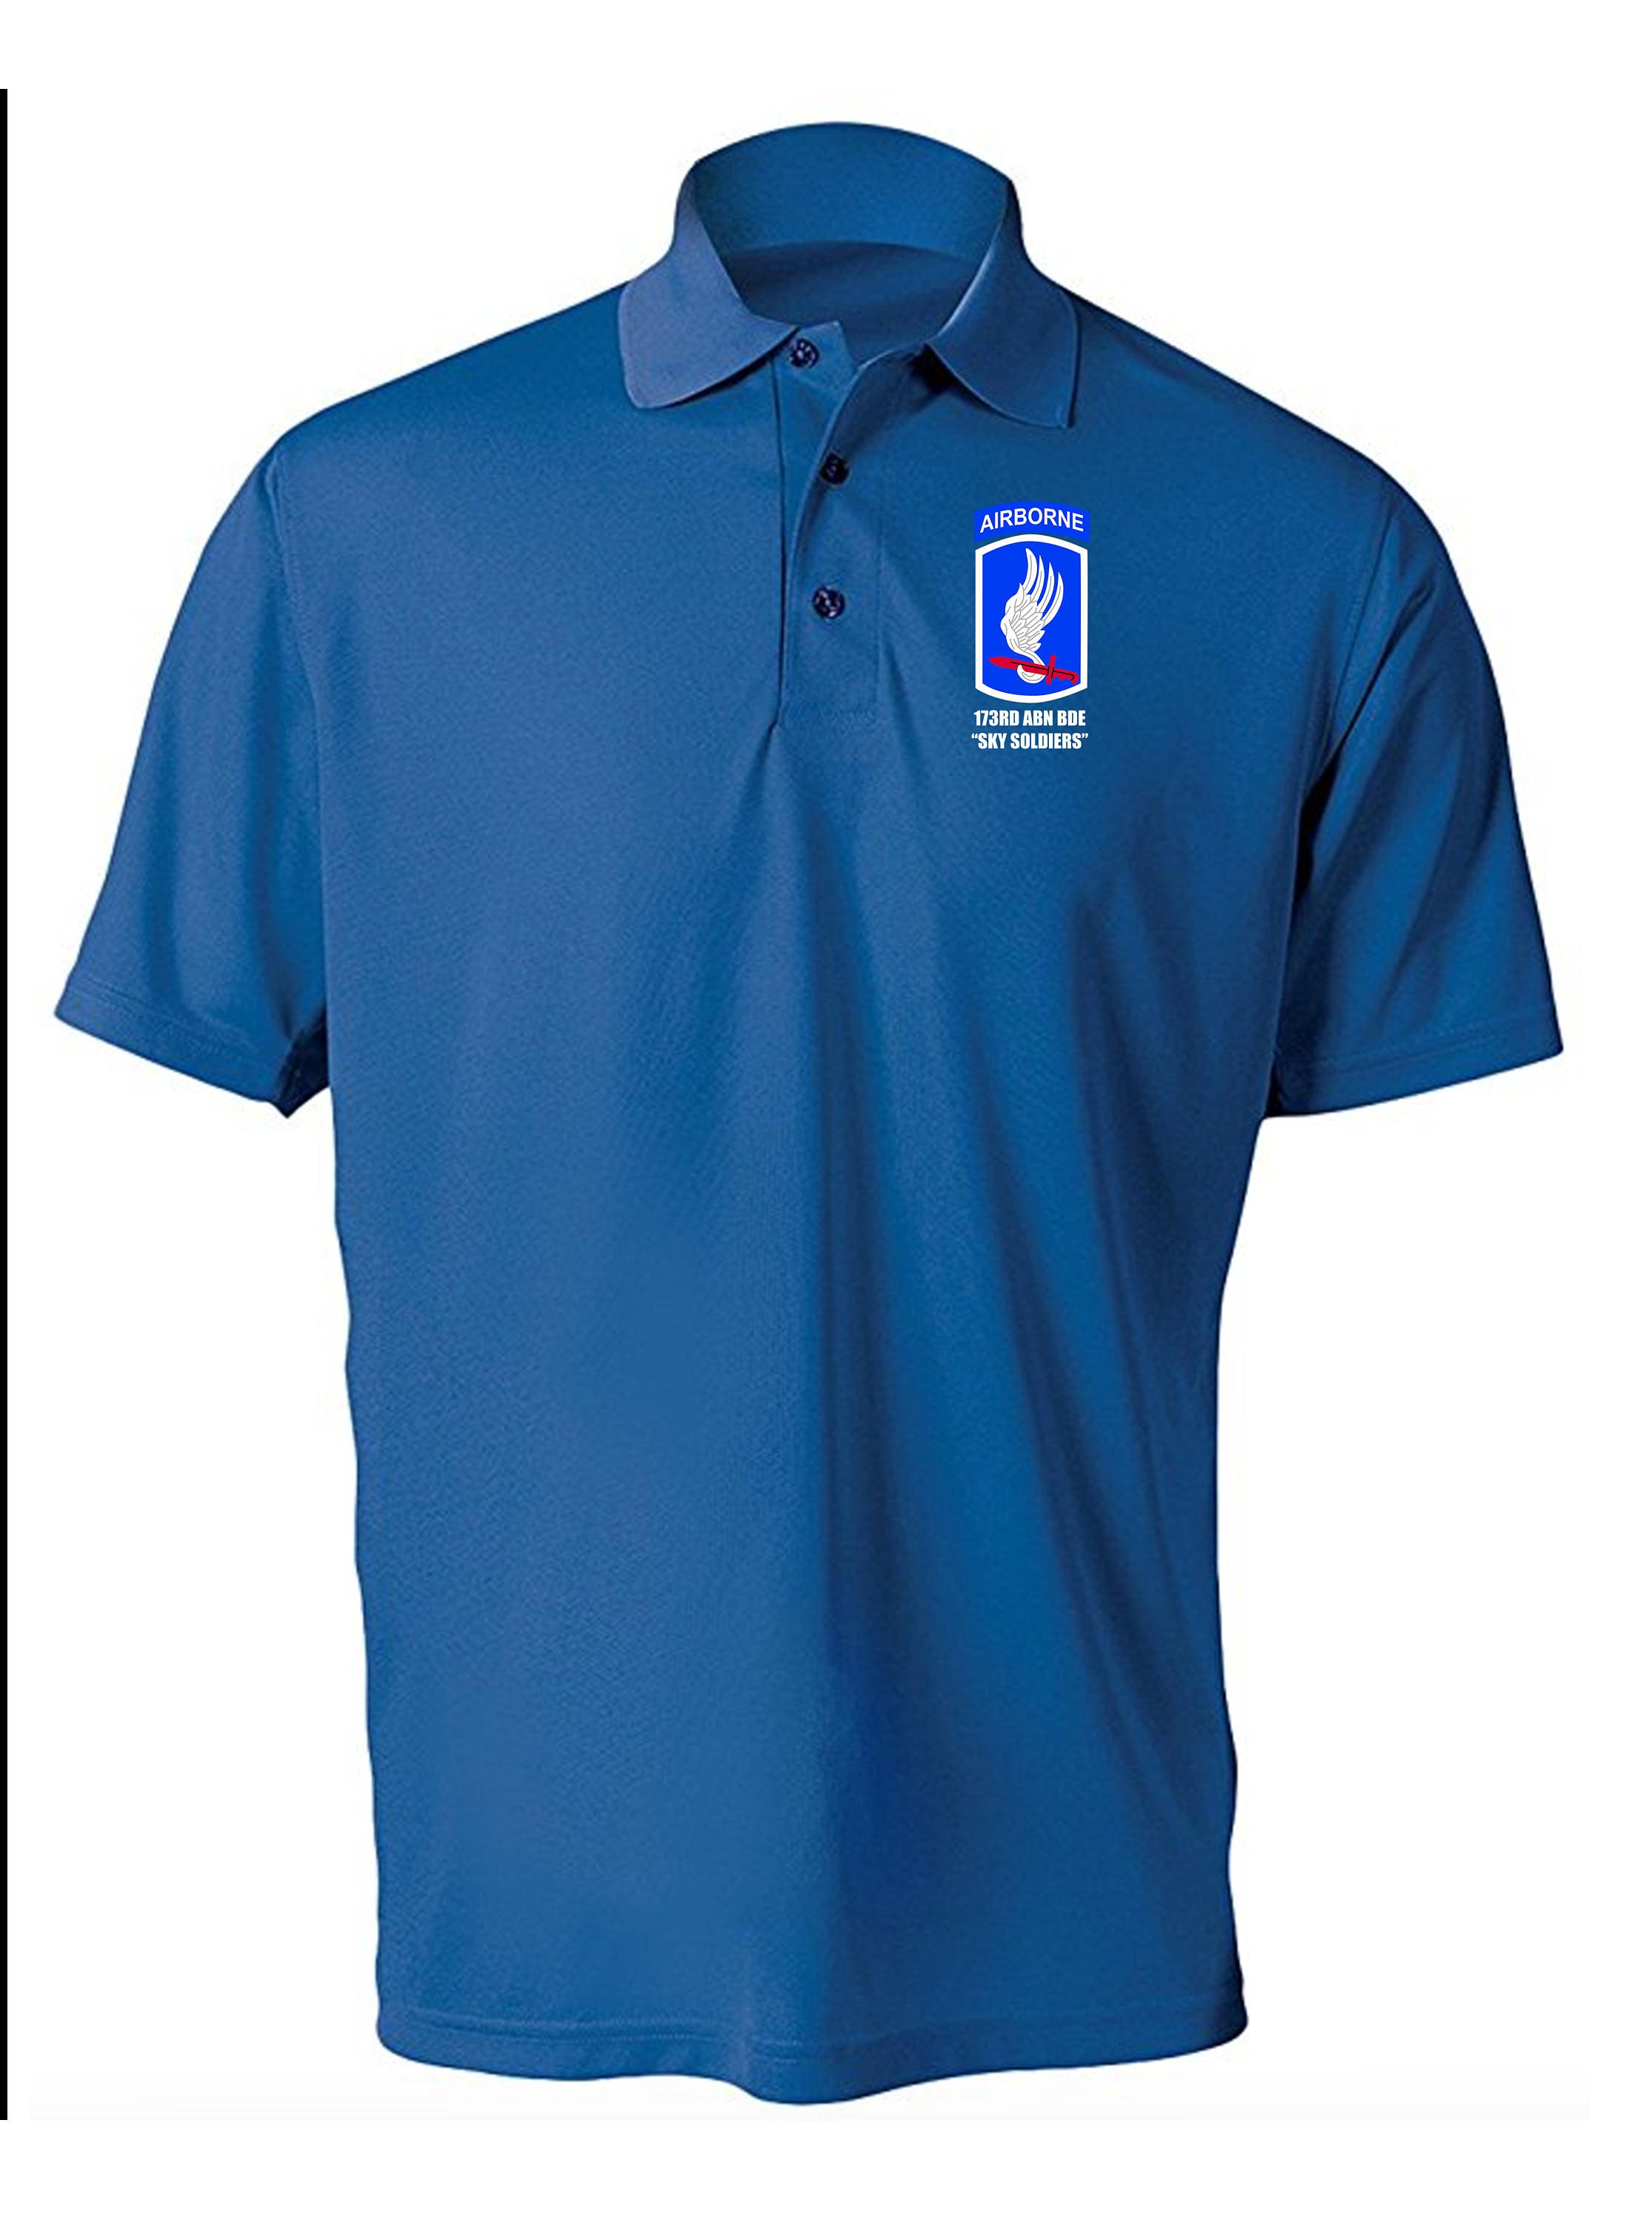 173rd Airborne Brigade Embroidered Moisture Wick Polo Shirt - Etsy